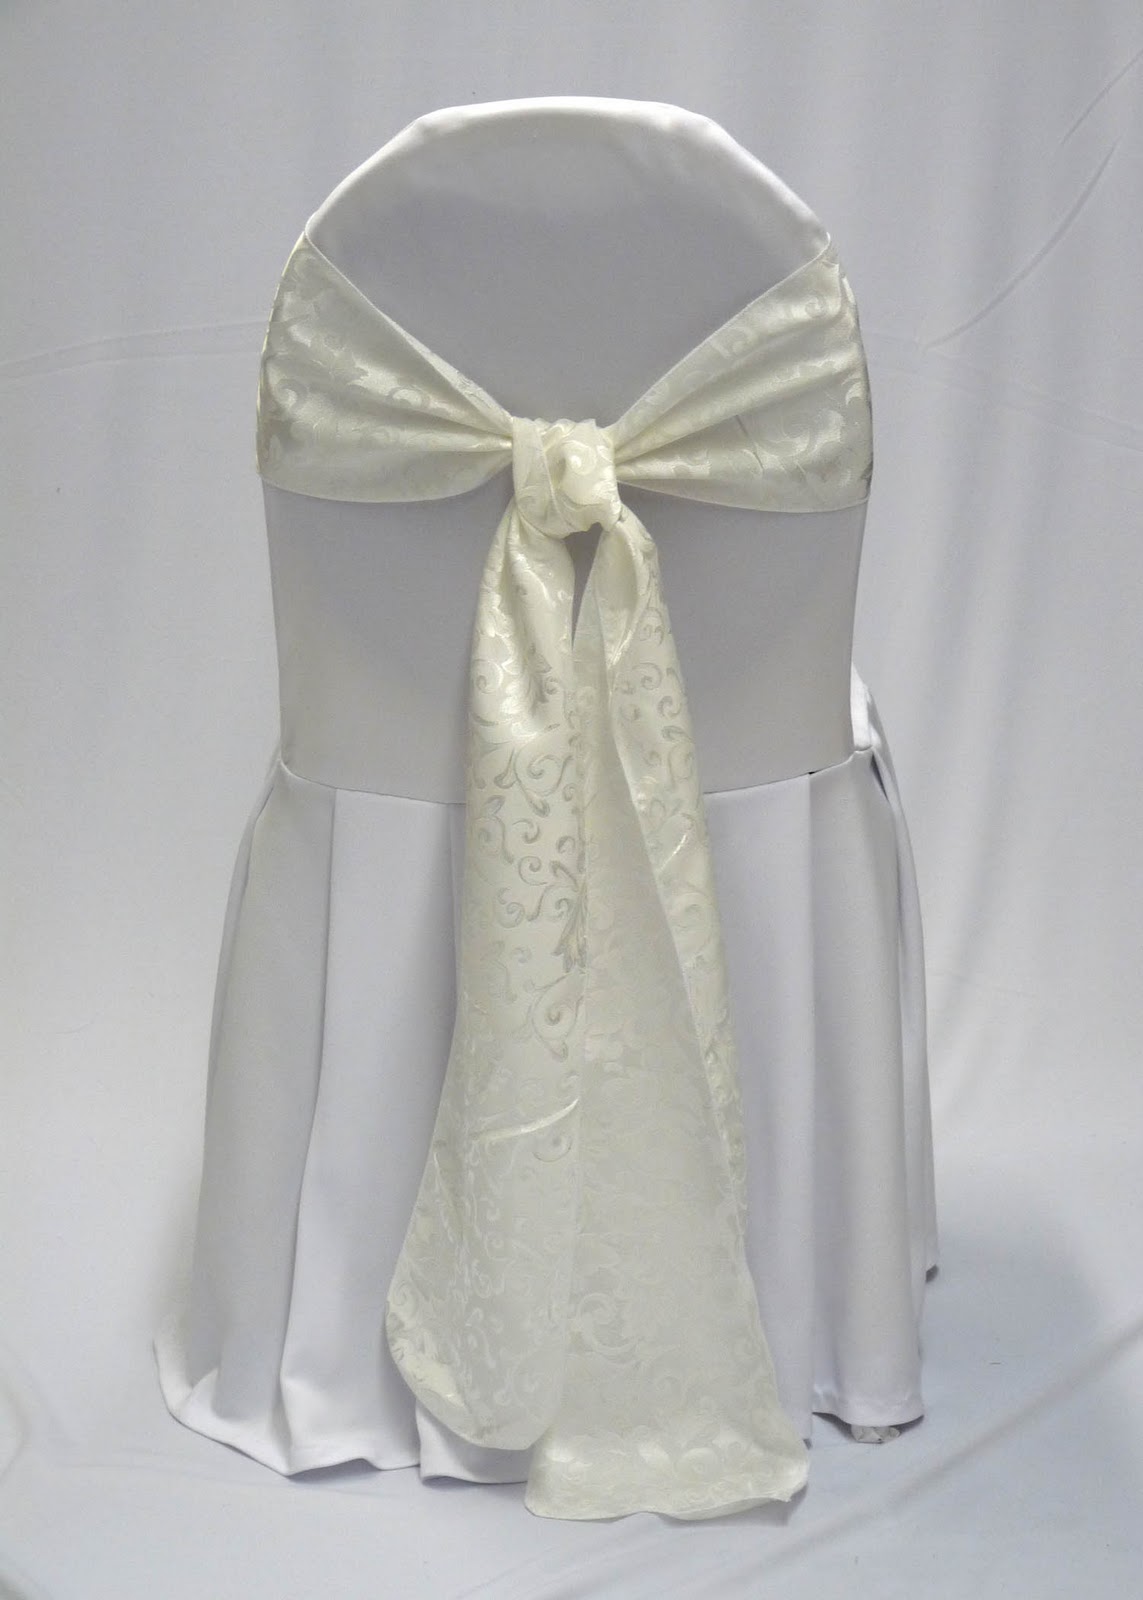 BANQUET HALL CHAIR COVER RENT WHITE WARM BROCADE TIE GTA 